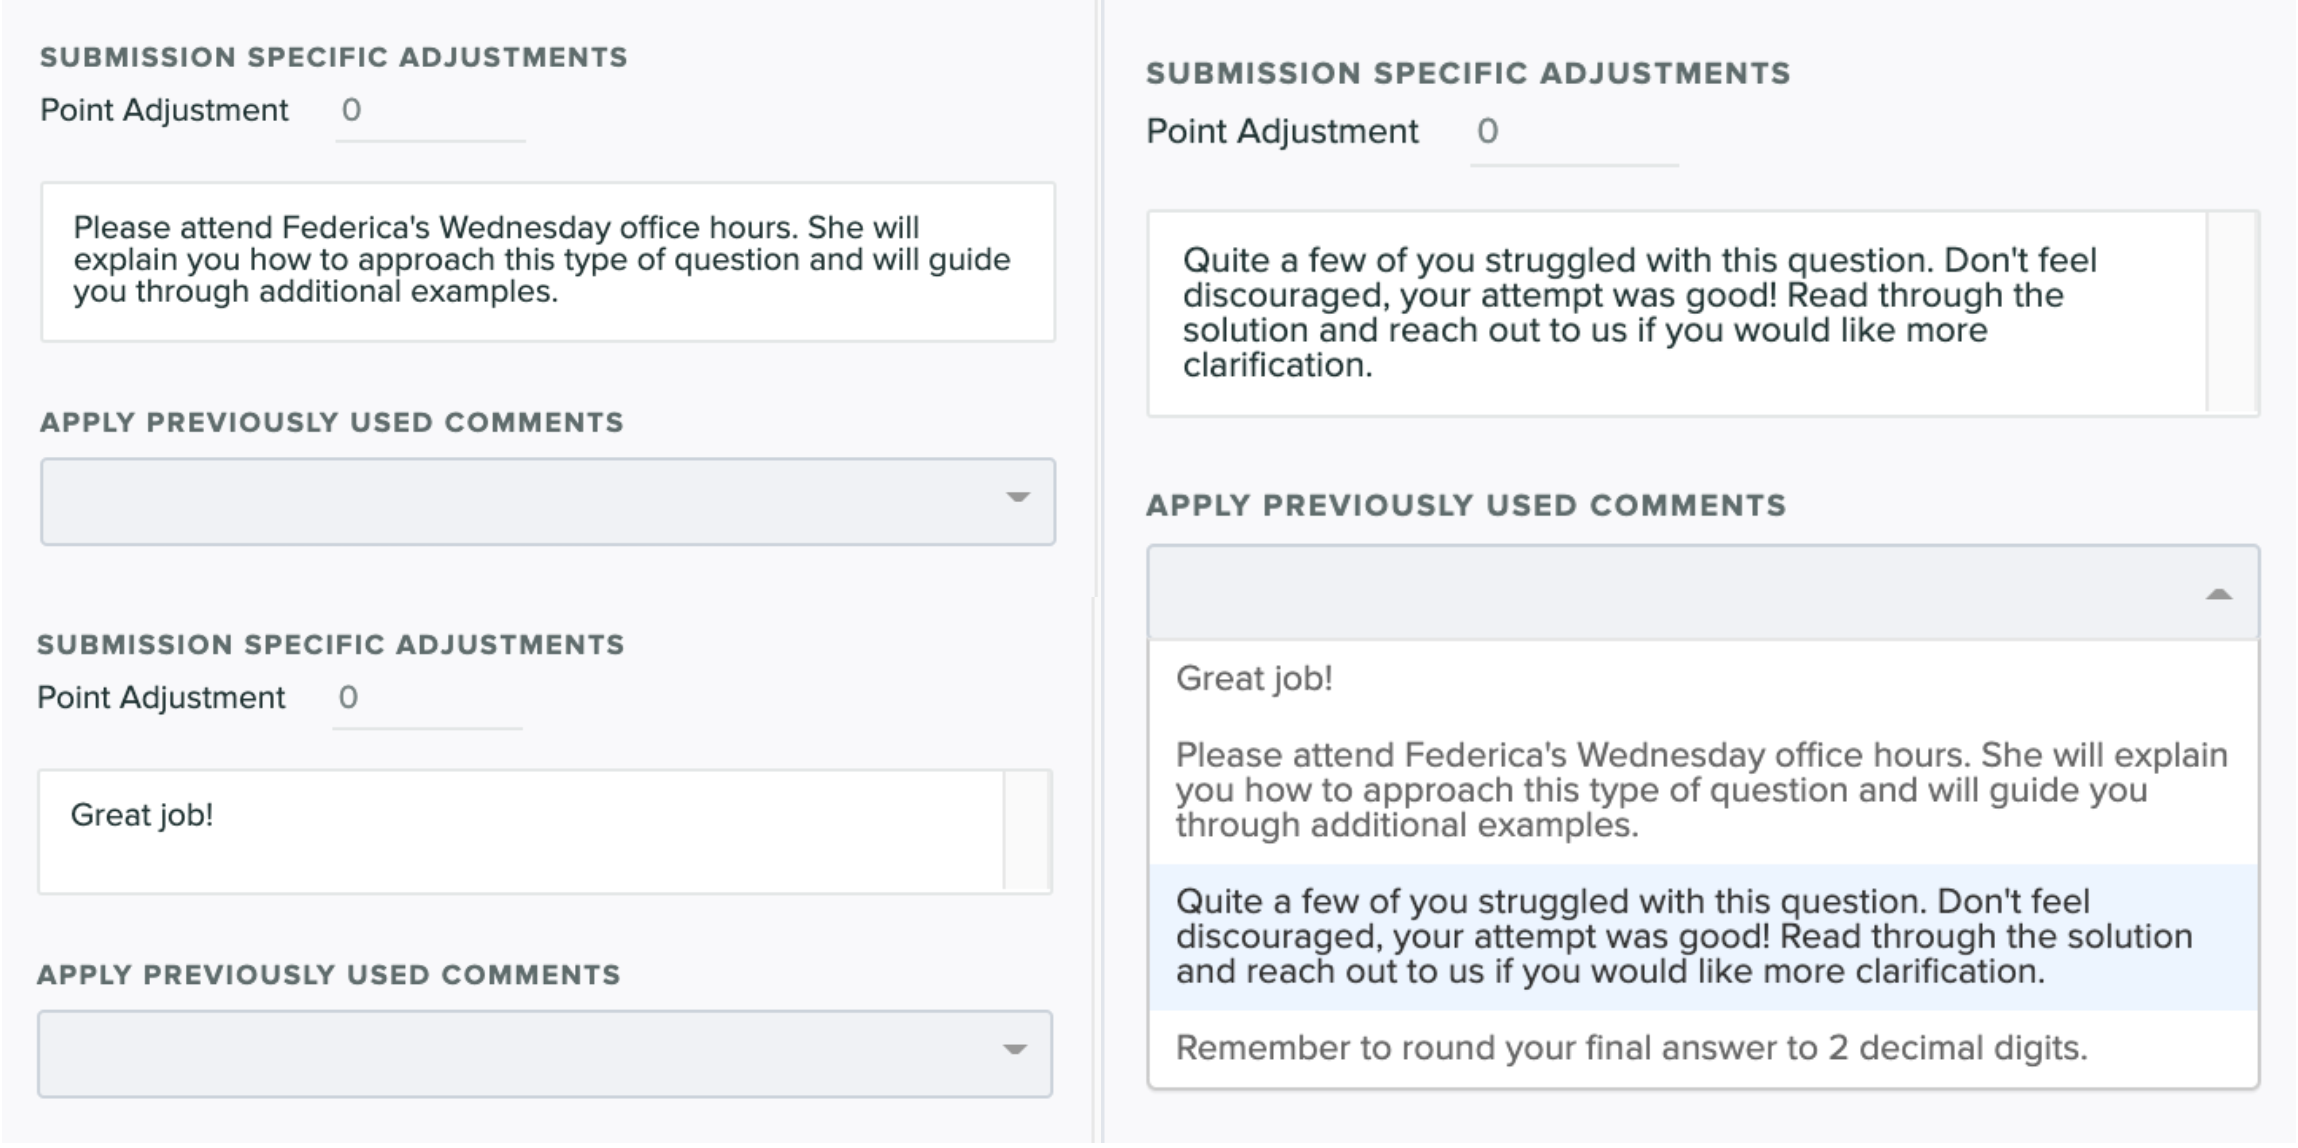 Screenshot from Gradescope's website showing several examples of personalized feedback, as well as a list of previously assigned feedback among which to possibly select.